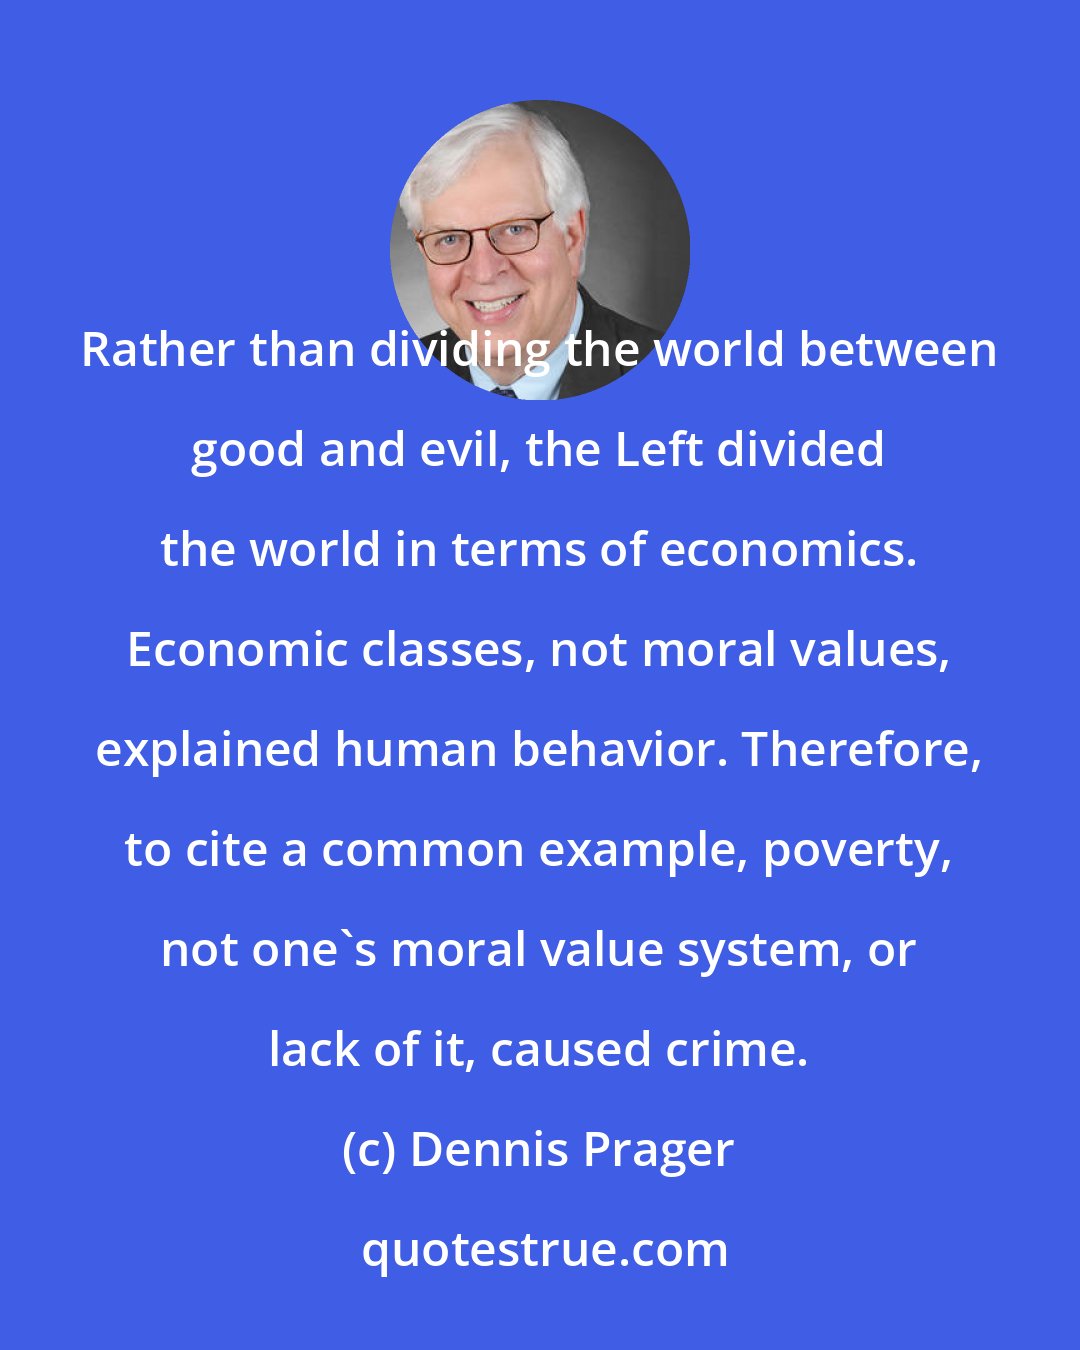 Dennis Prager: Rather than dividing the world between good and evil, the Left divided the world in terms of economics. Economic classes, not moral values, explained human behavior. Therefore, to cite a common example, poverty, not one's moral value system, or lack of it, caused crime.